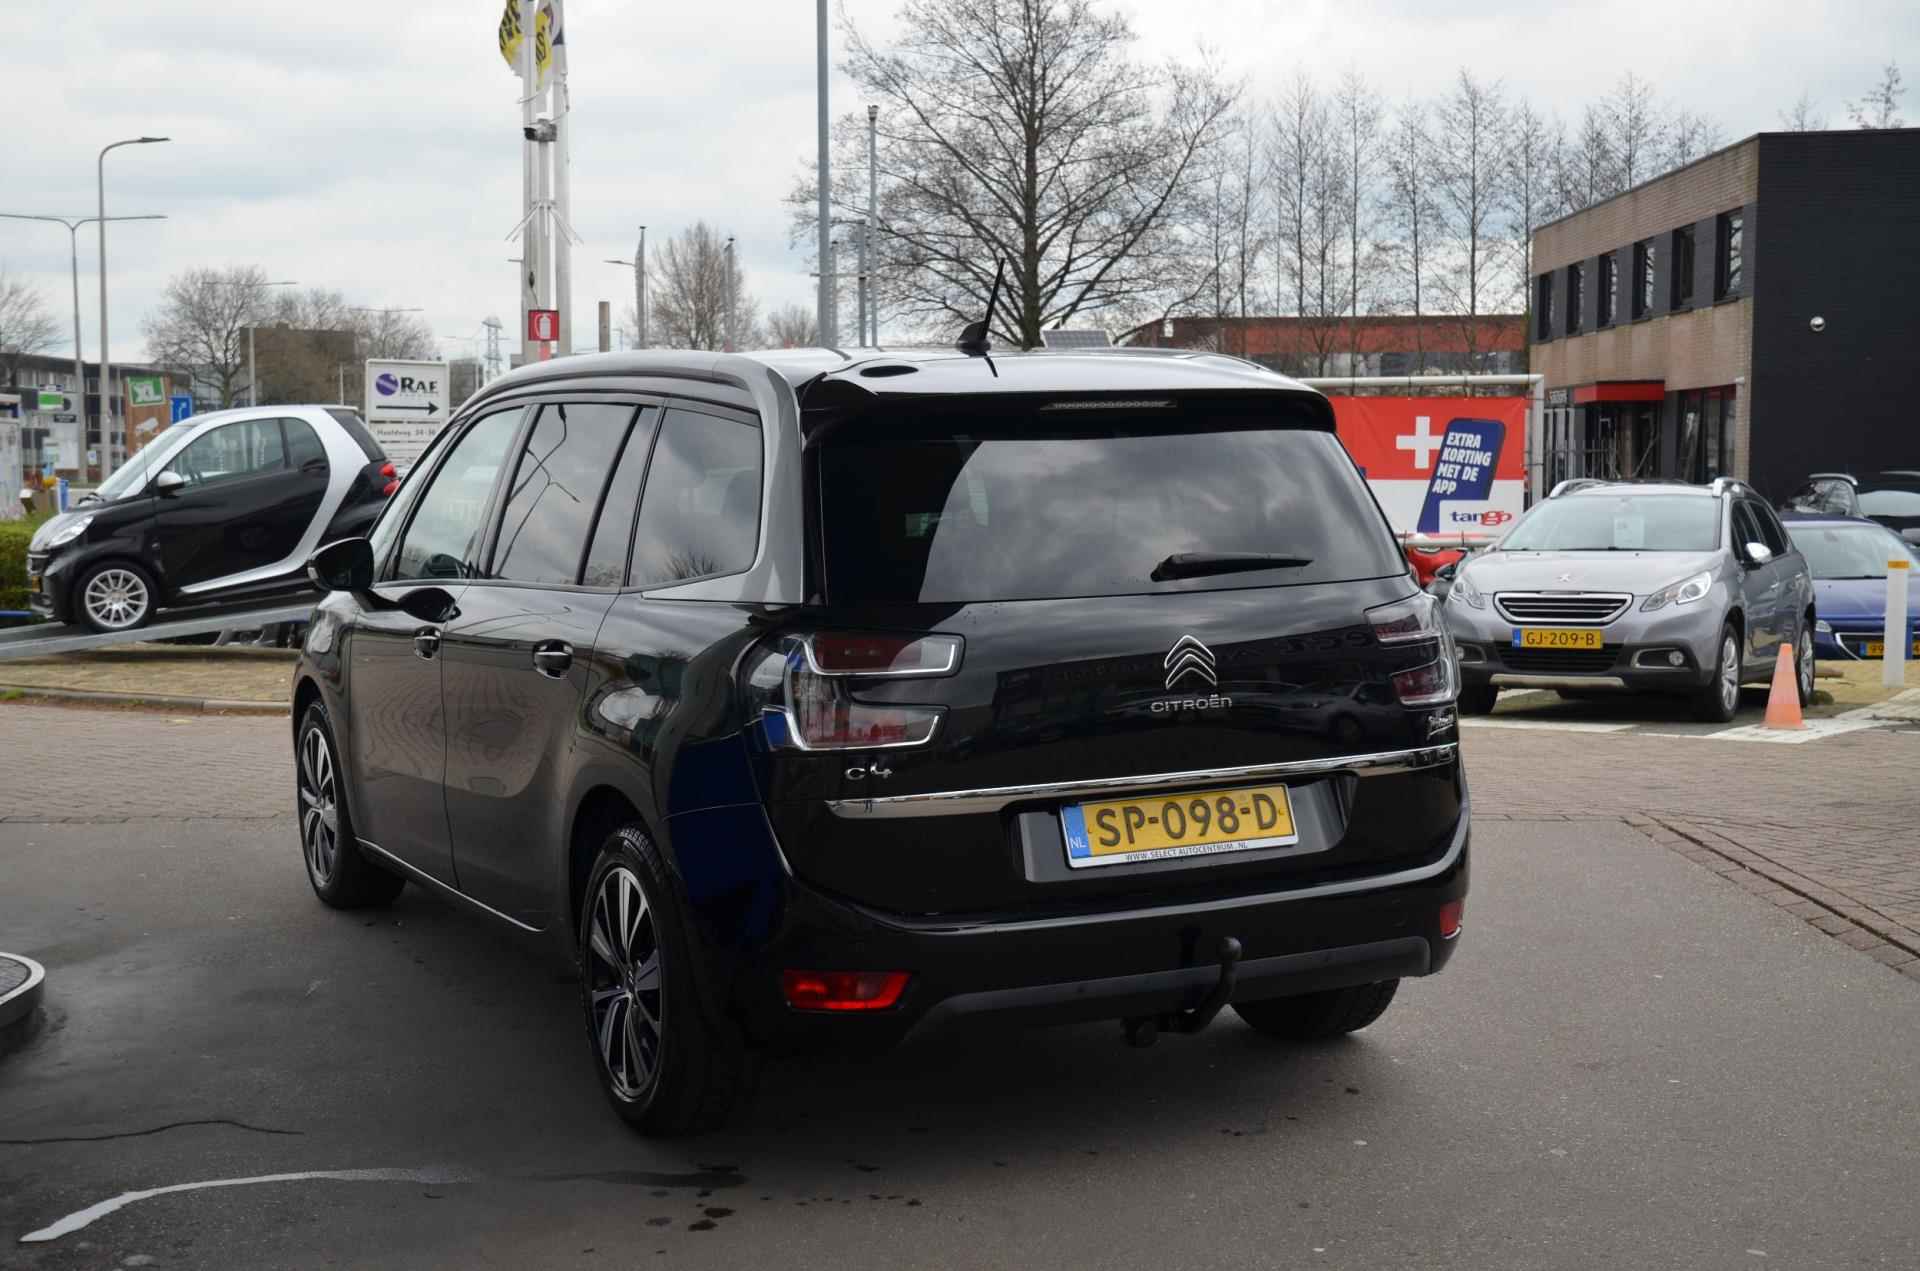 Citroen Grand C4 Picasso 1.2 7 PERS|7 PERSOONS|2E PAASDAG OPEN. - 8/30